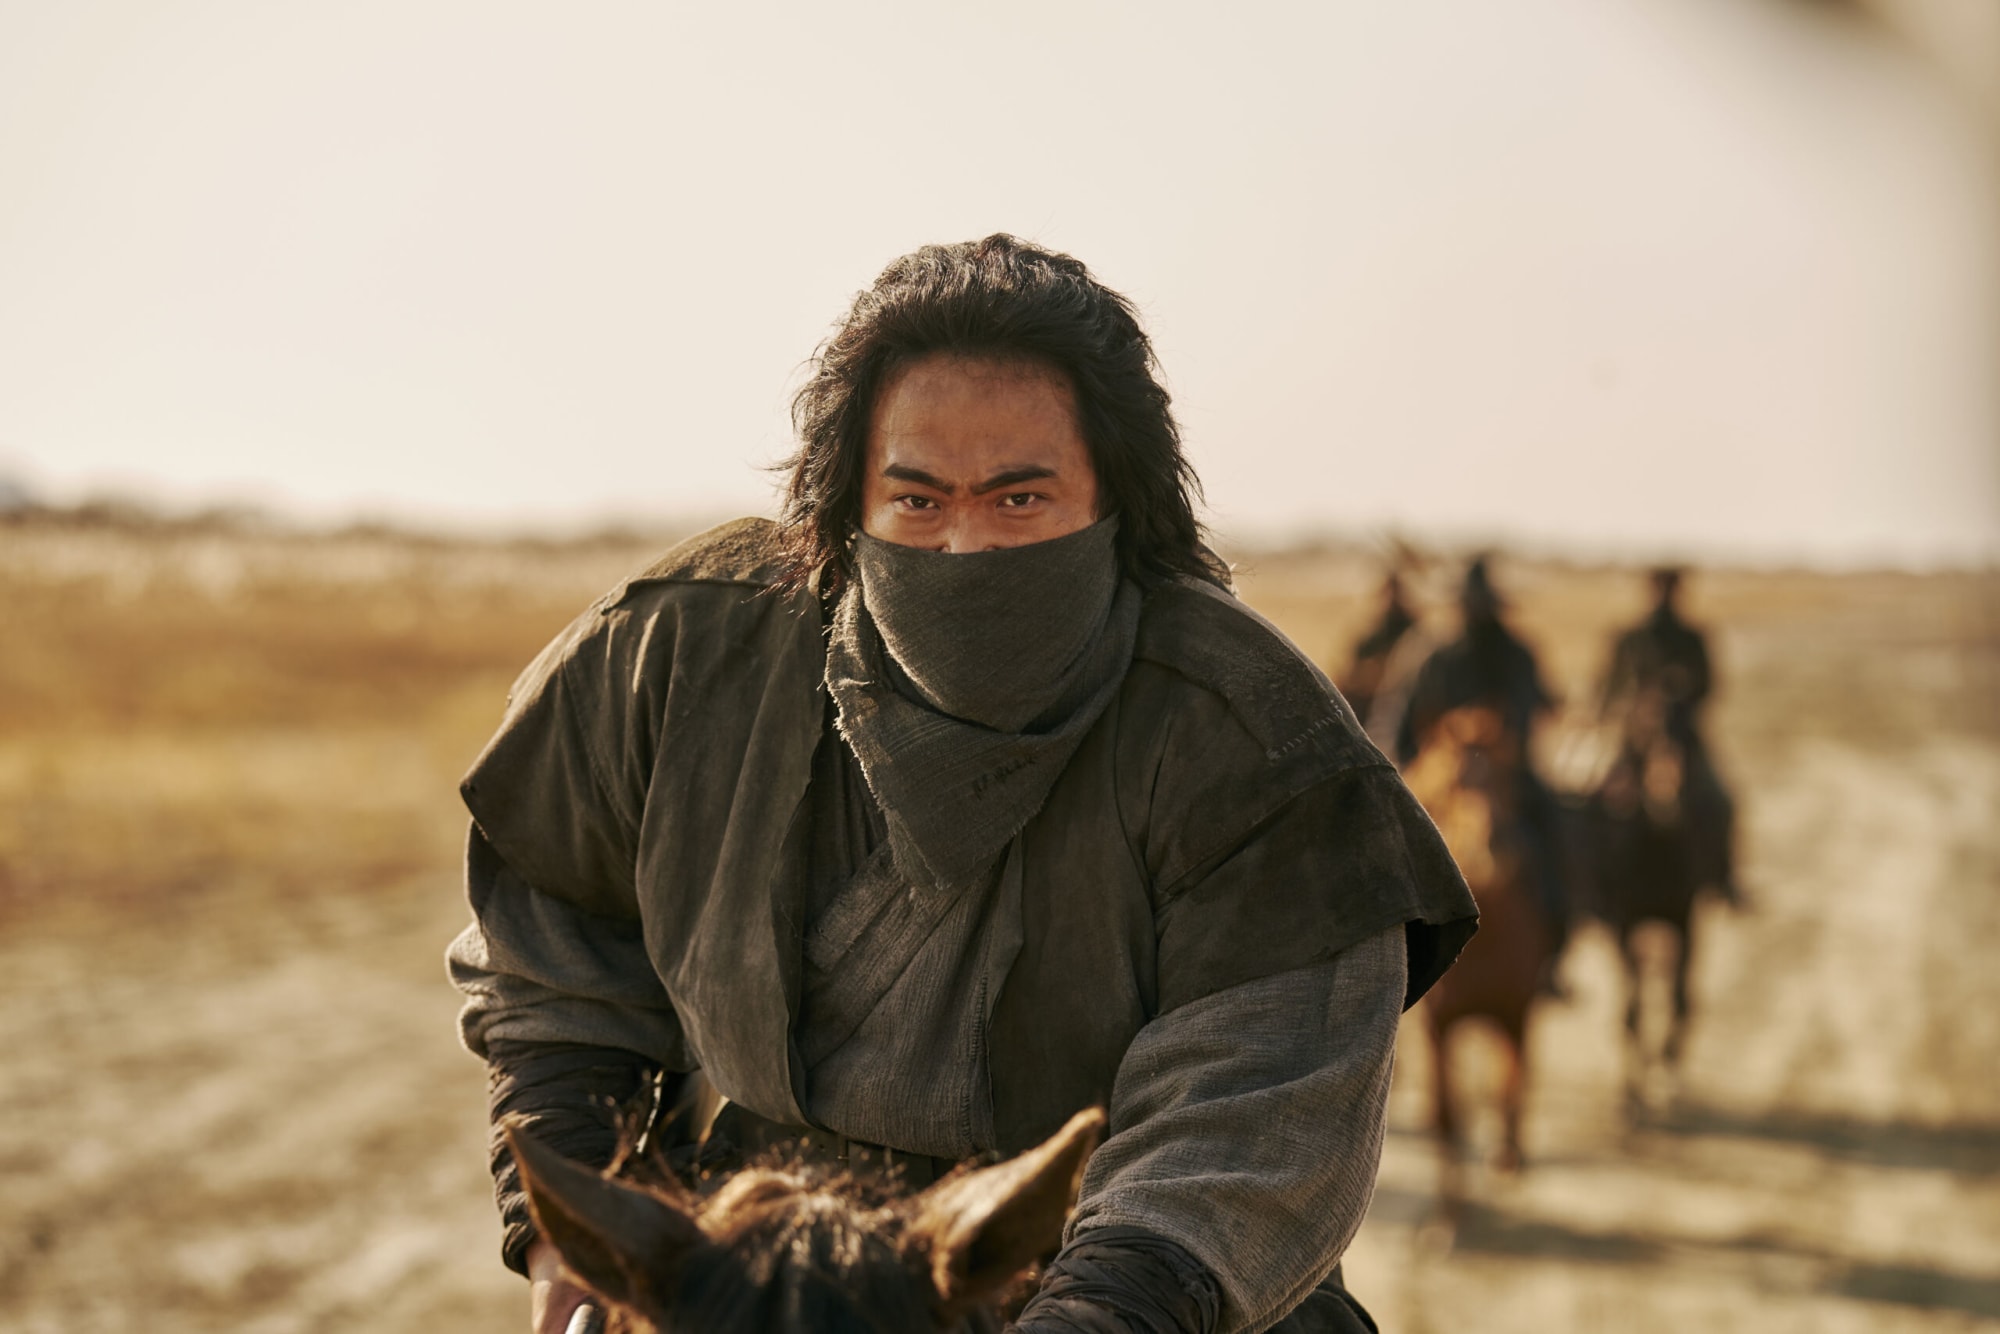 Song of the Bandits cast: Who stars in the Korean western?